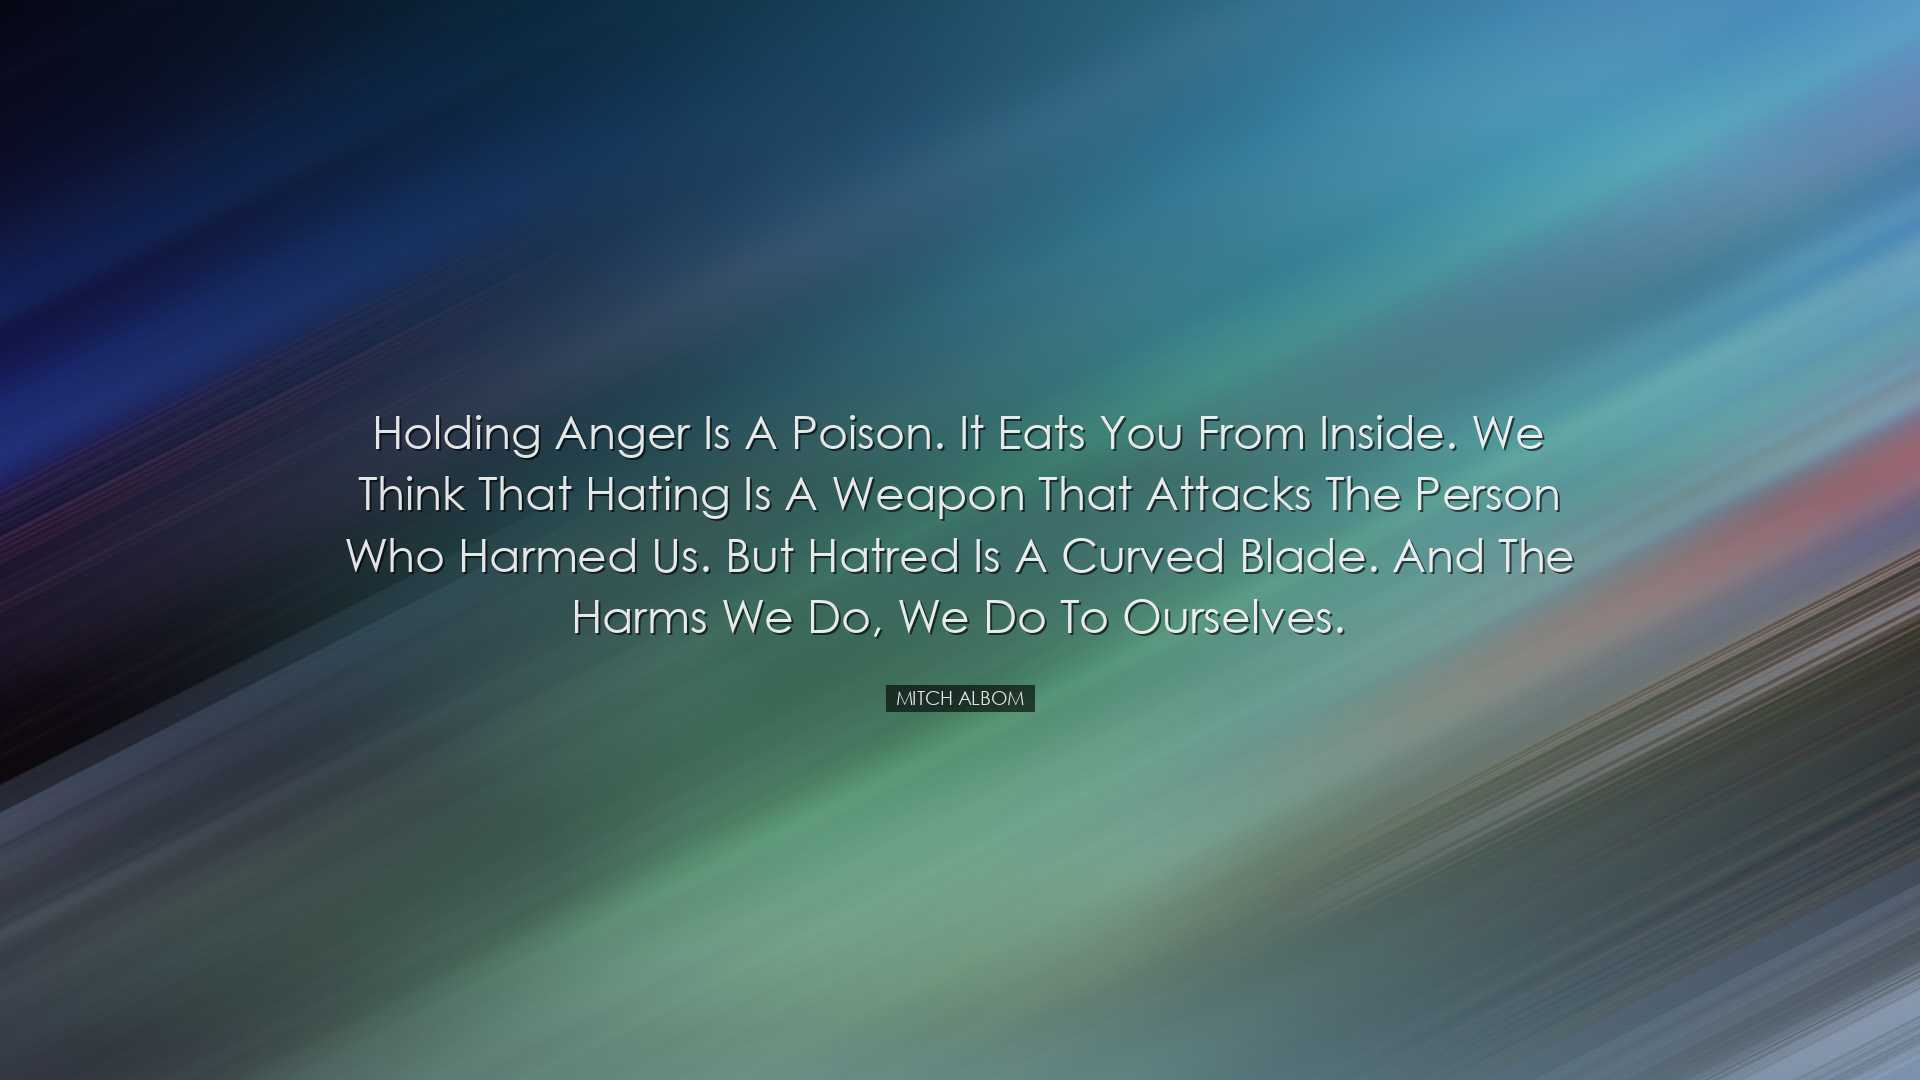 Holding anger is a poison. It eats you from inside. We think that